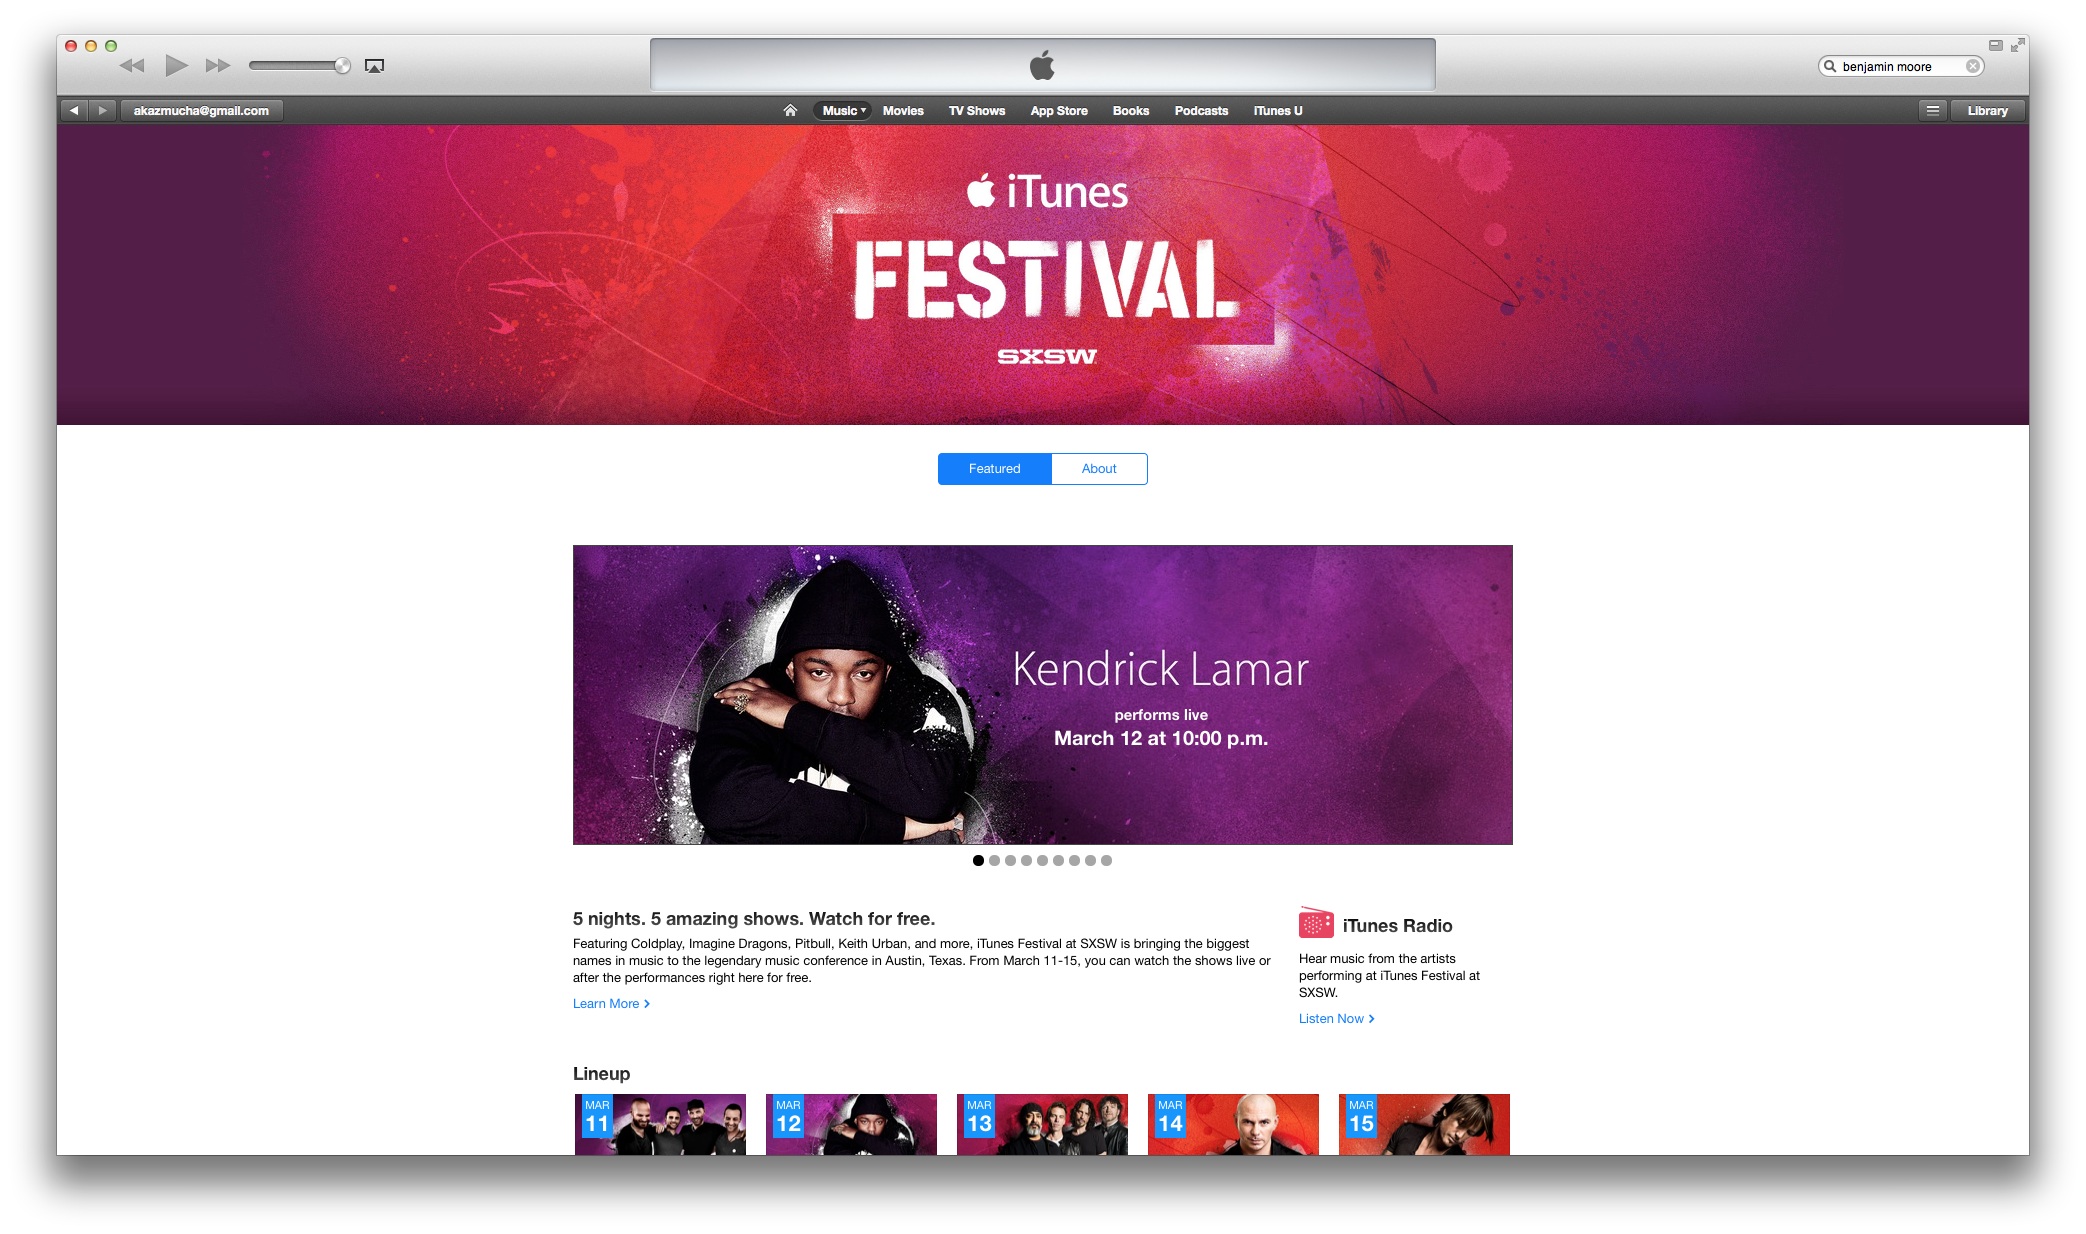 iTunes Festival streaming app coming soon, but requires iOS 7.1?